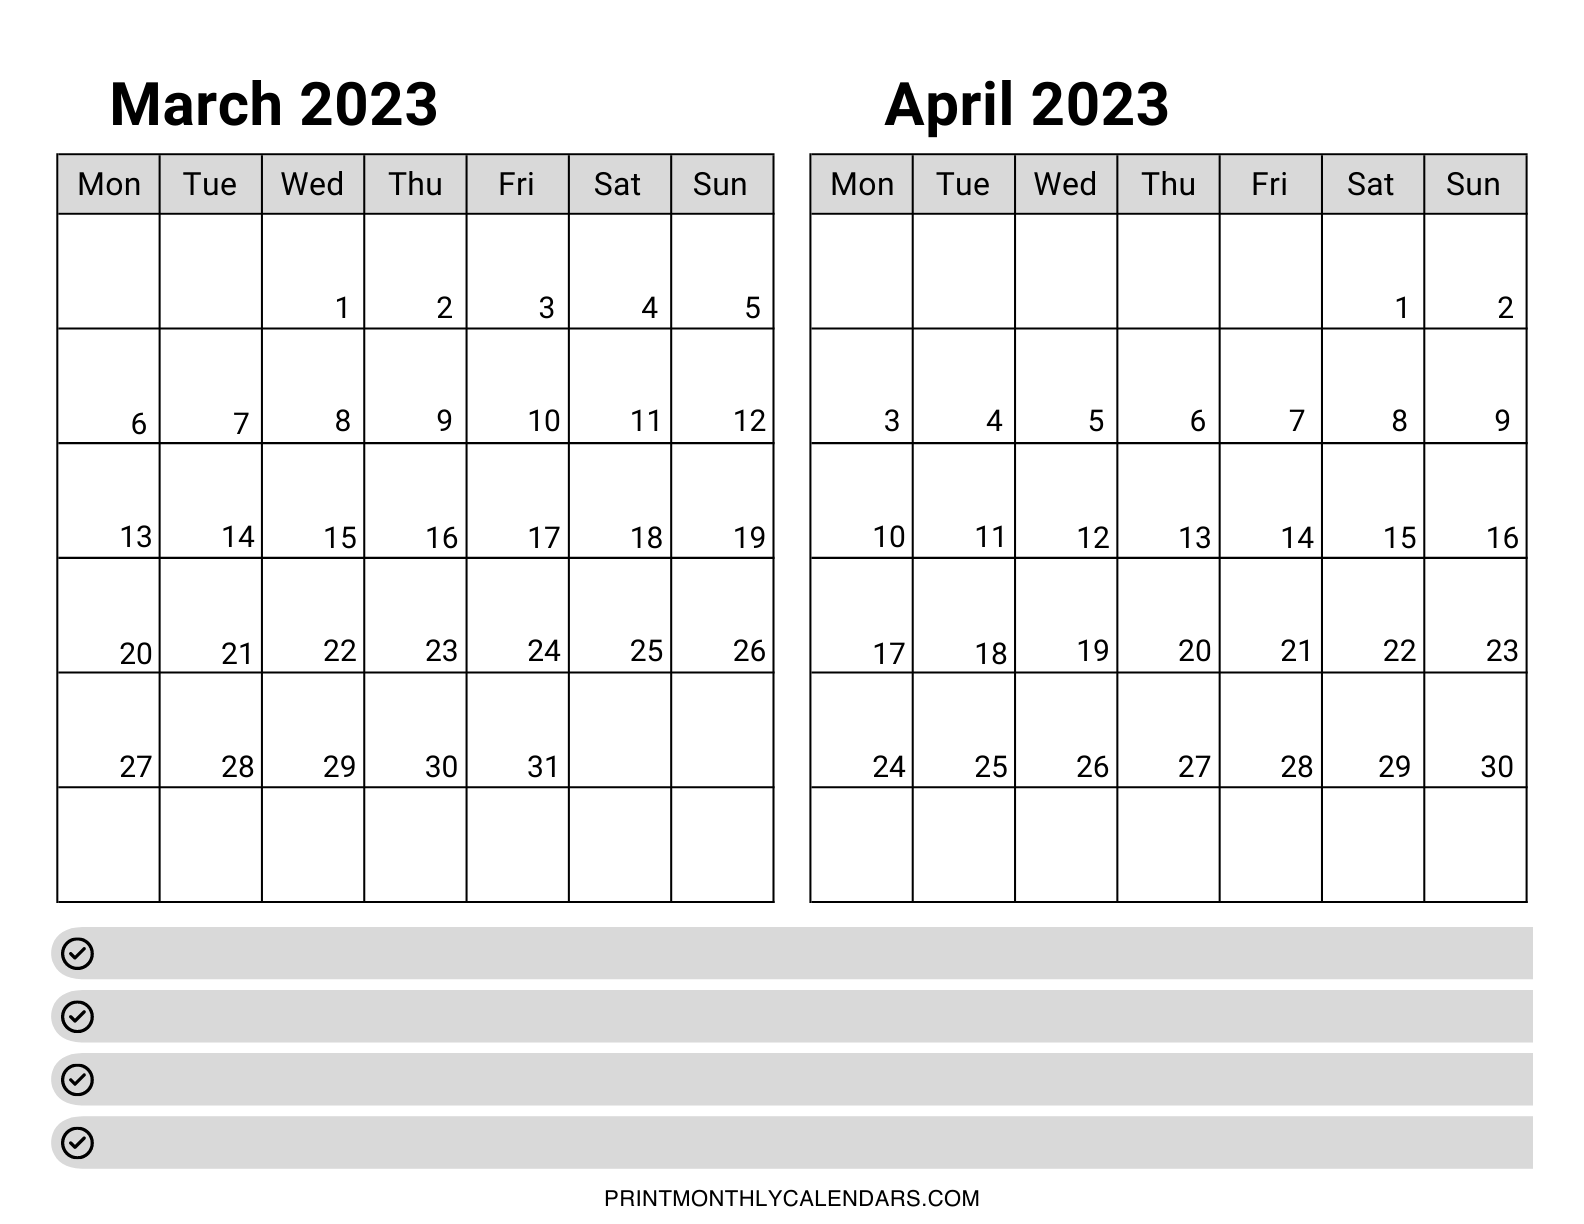 The two-month calendar template is built in a landscape layout on one page. On the left, the month of March 2023 is designed, while on the right, the month of April 2023 is designed. At the bottom of both calendar grids is a blank notes section.